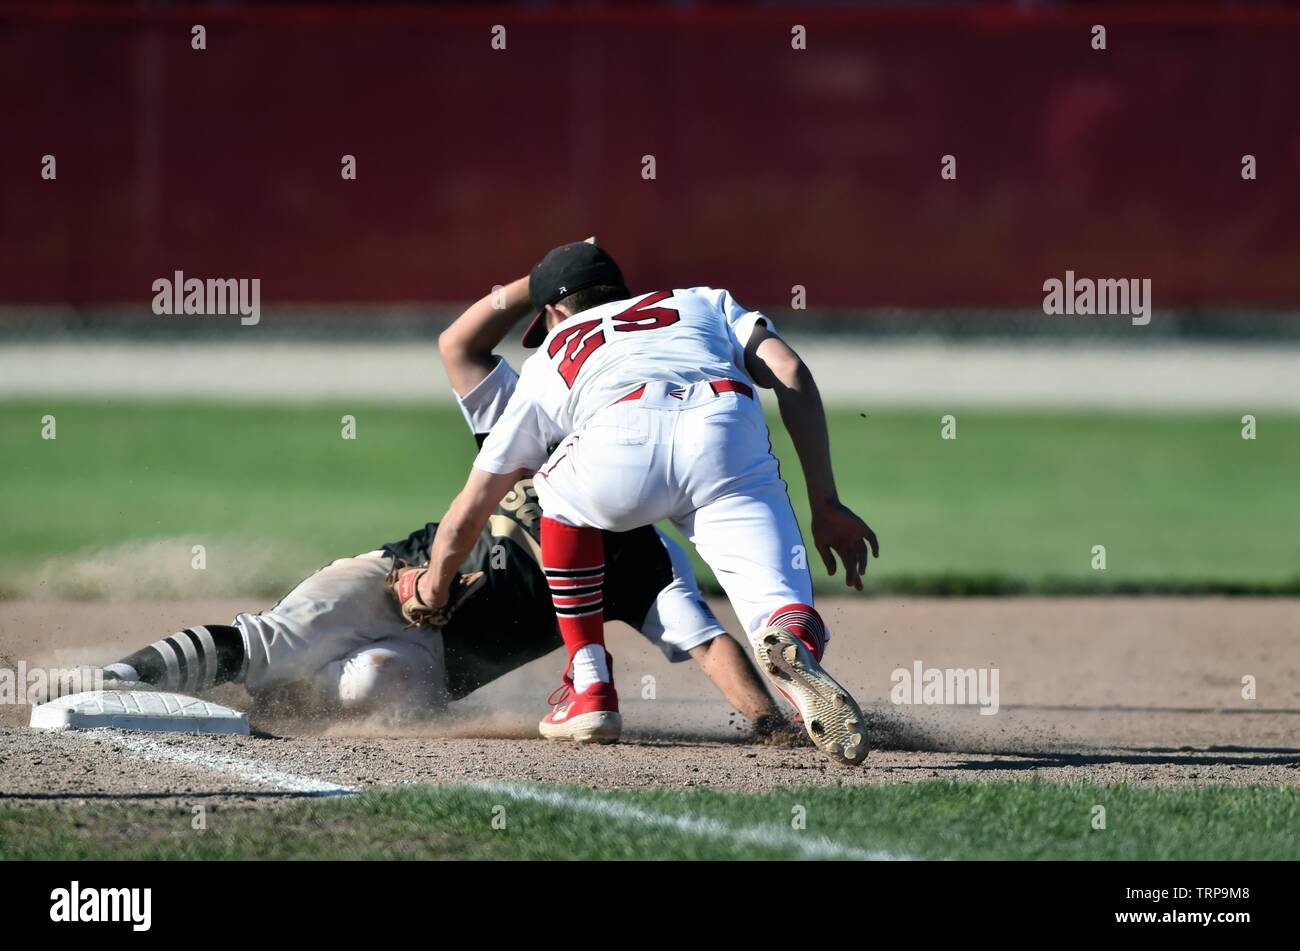 Runner sliding in safely to third base as the opposing third baseman's tag was too late to retire the base runner. USA. Stock Photo